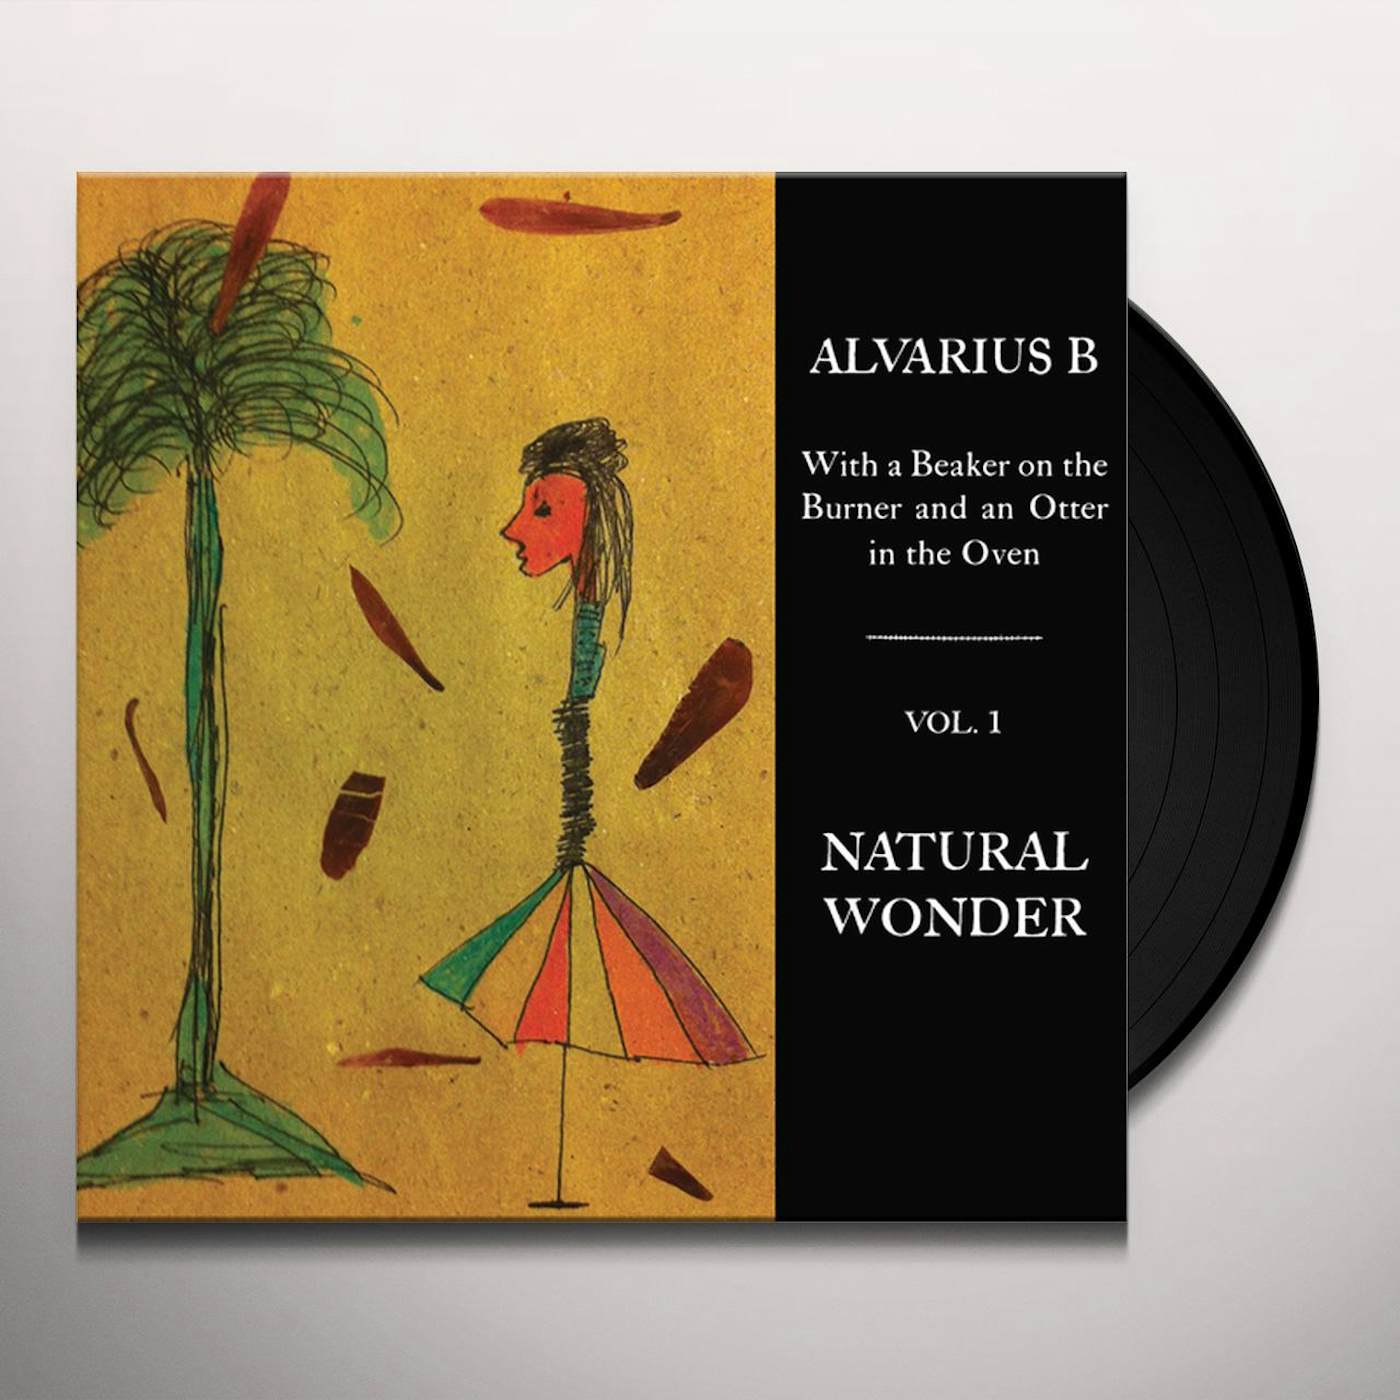 Alvarius B. WITH A BEAKER ON THE BURNER AND AN OTTER IN THE OVEN - VOL. 1 NATURAL WONDER Vinyl Record